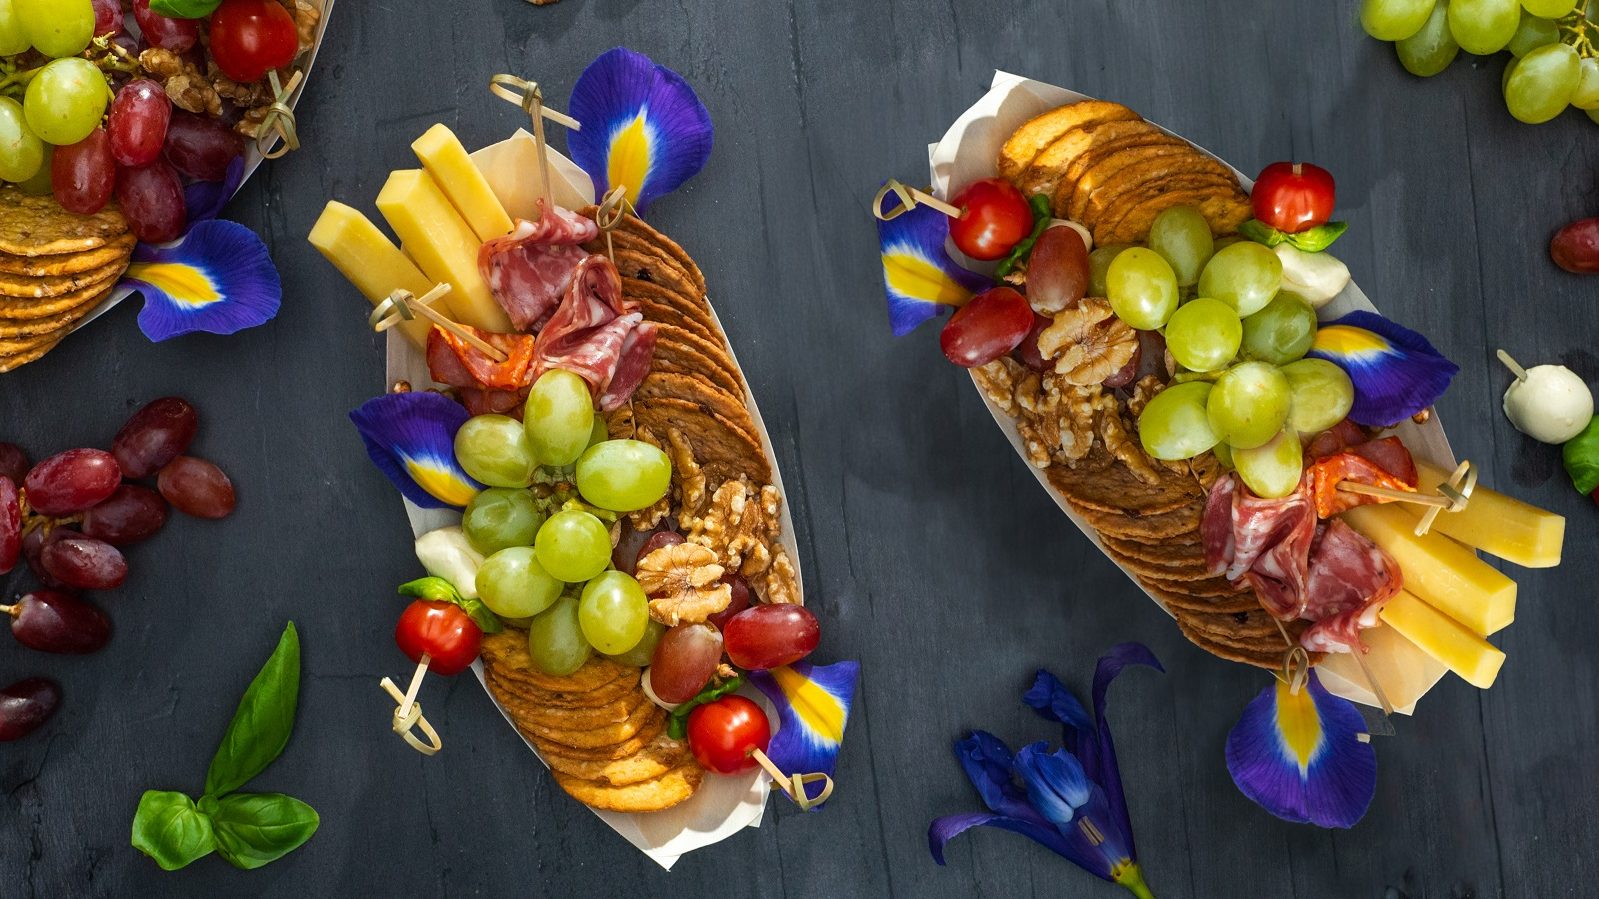 Crackers, grapes, cheese, and cocktail picks in small boats.